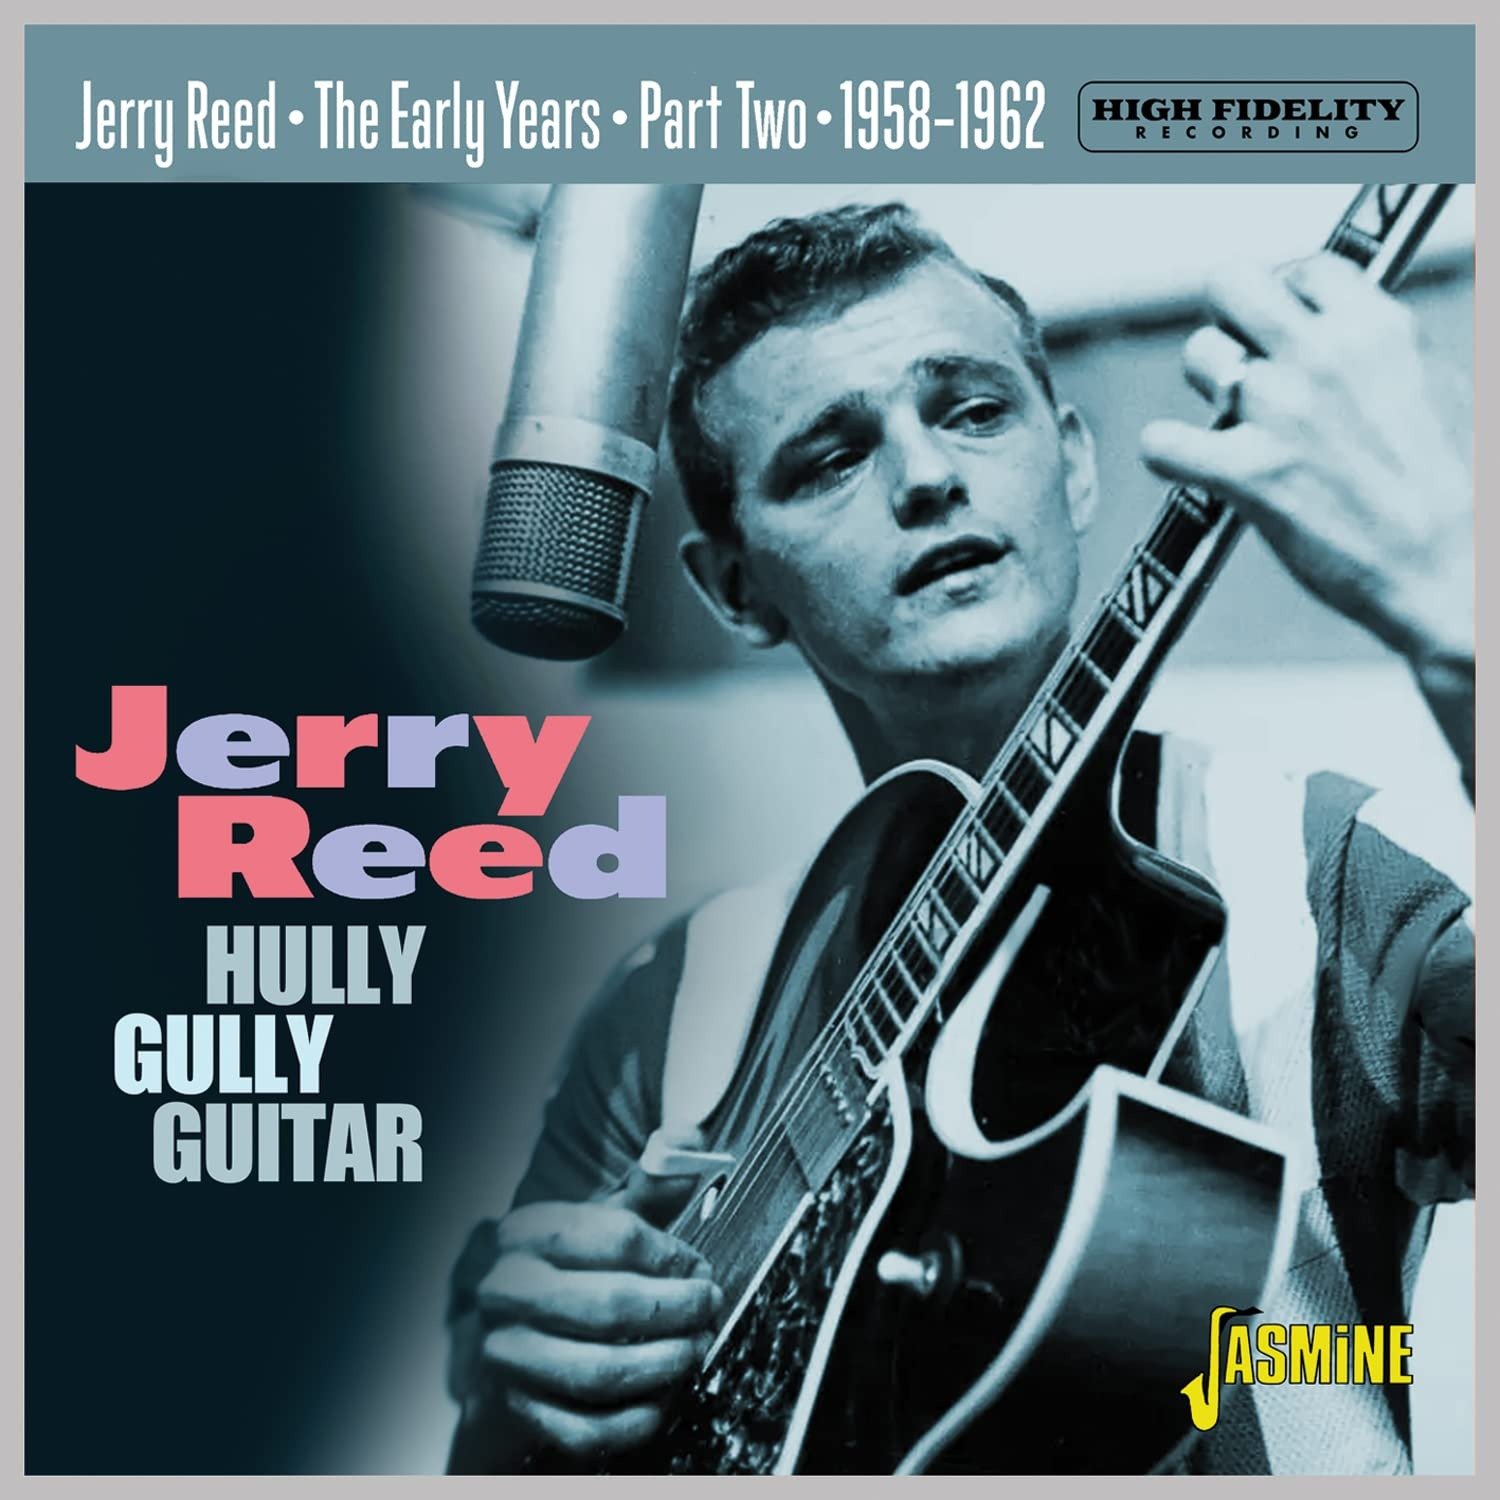 CD Shop - REED, JERRY HULLY GULLY GUITAR - THE EARLY YEARS PART TWO - 1958-1962